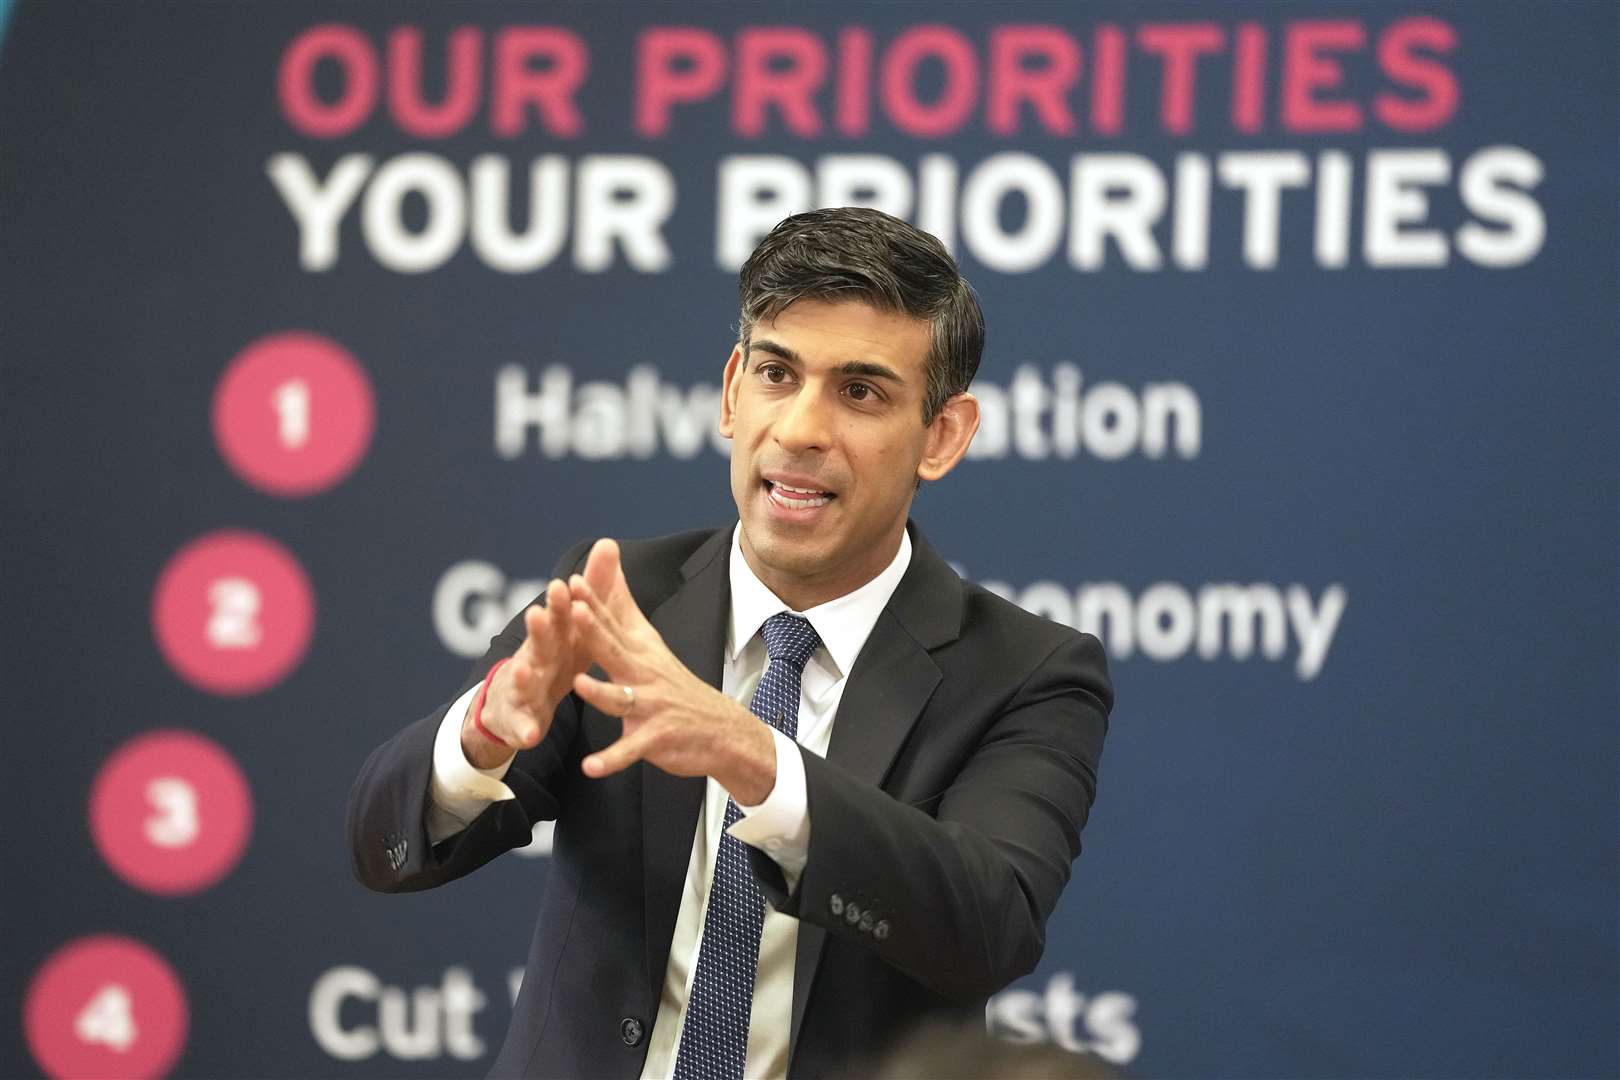 Rishi Sunak takes part in a Q&A session, following the announcement of a £160 million plan that will “stamp out” anti-social behaviour (Kin Cheung/PA)